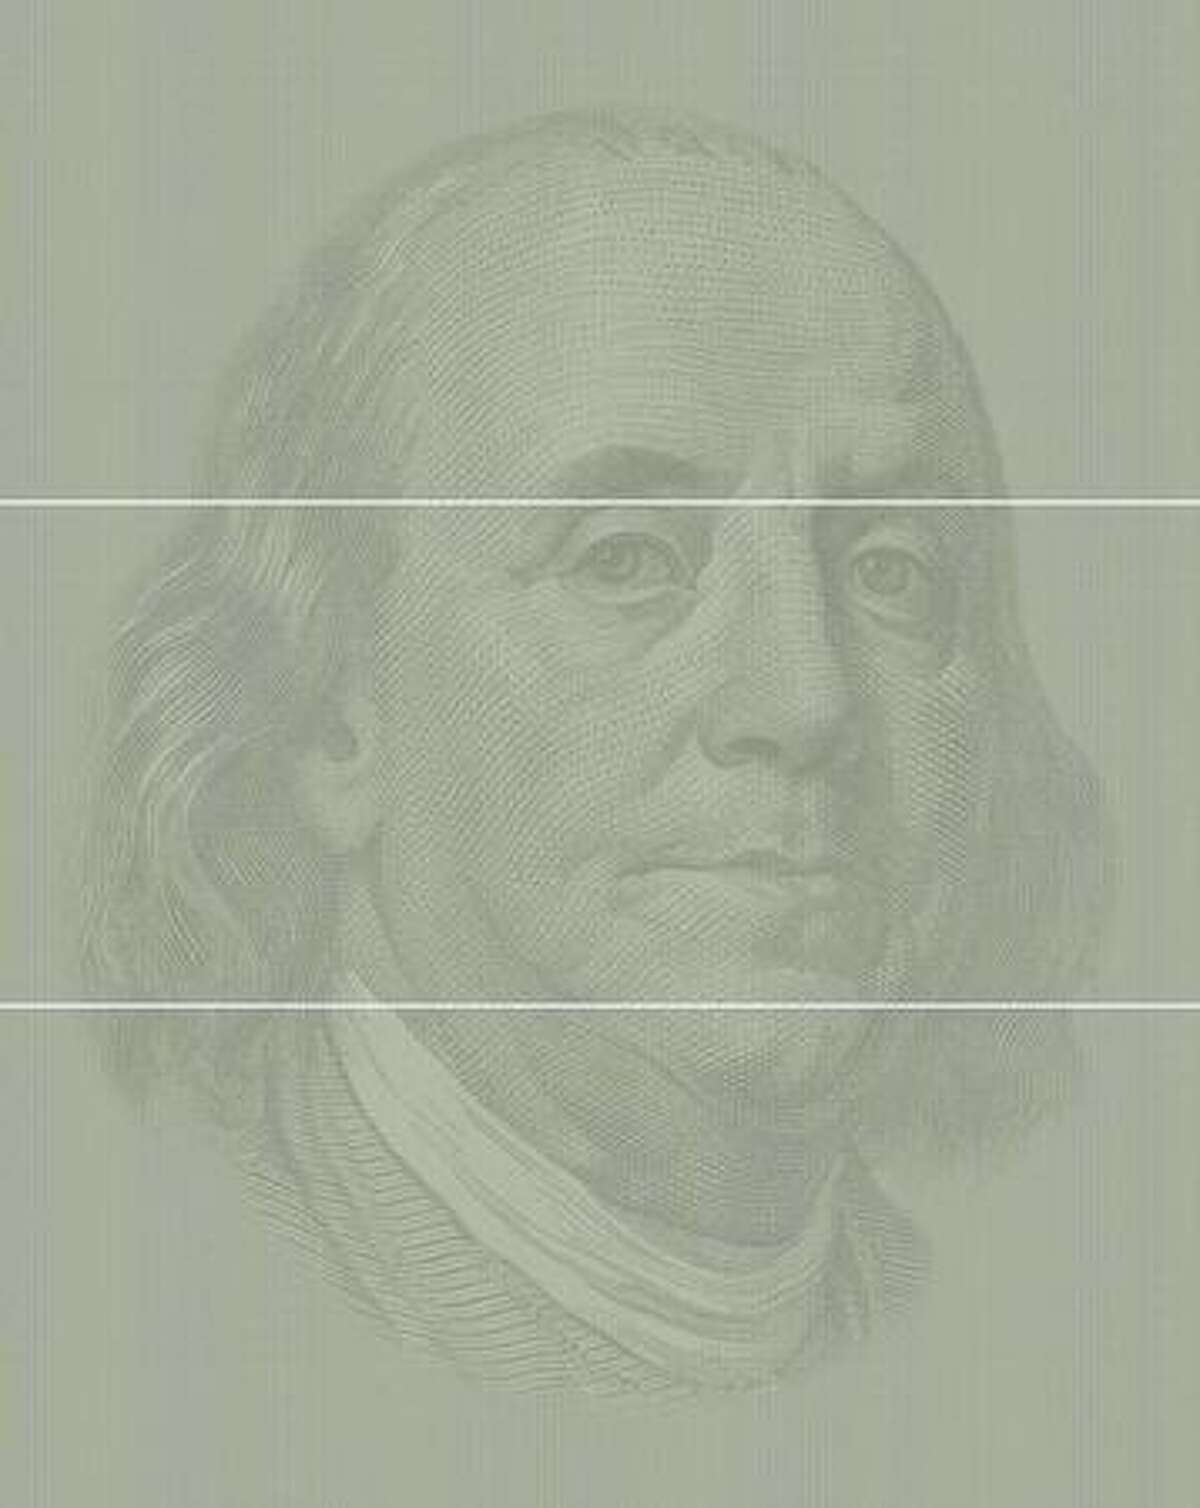 Ben Franklin, 2007: Shows 125,000 one-hundred dollar bills ($12.5 million), the amount the U.S. government spent every hour on the war in Iraq. (Chris Jordan)